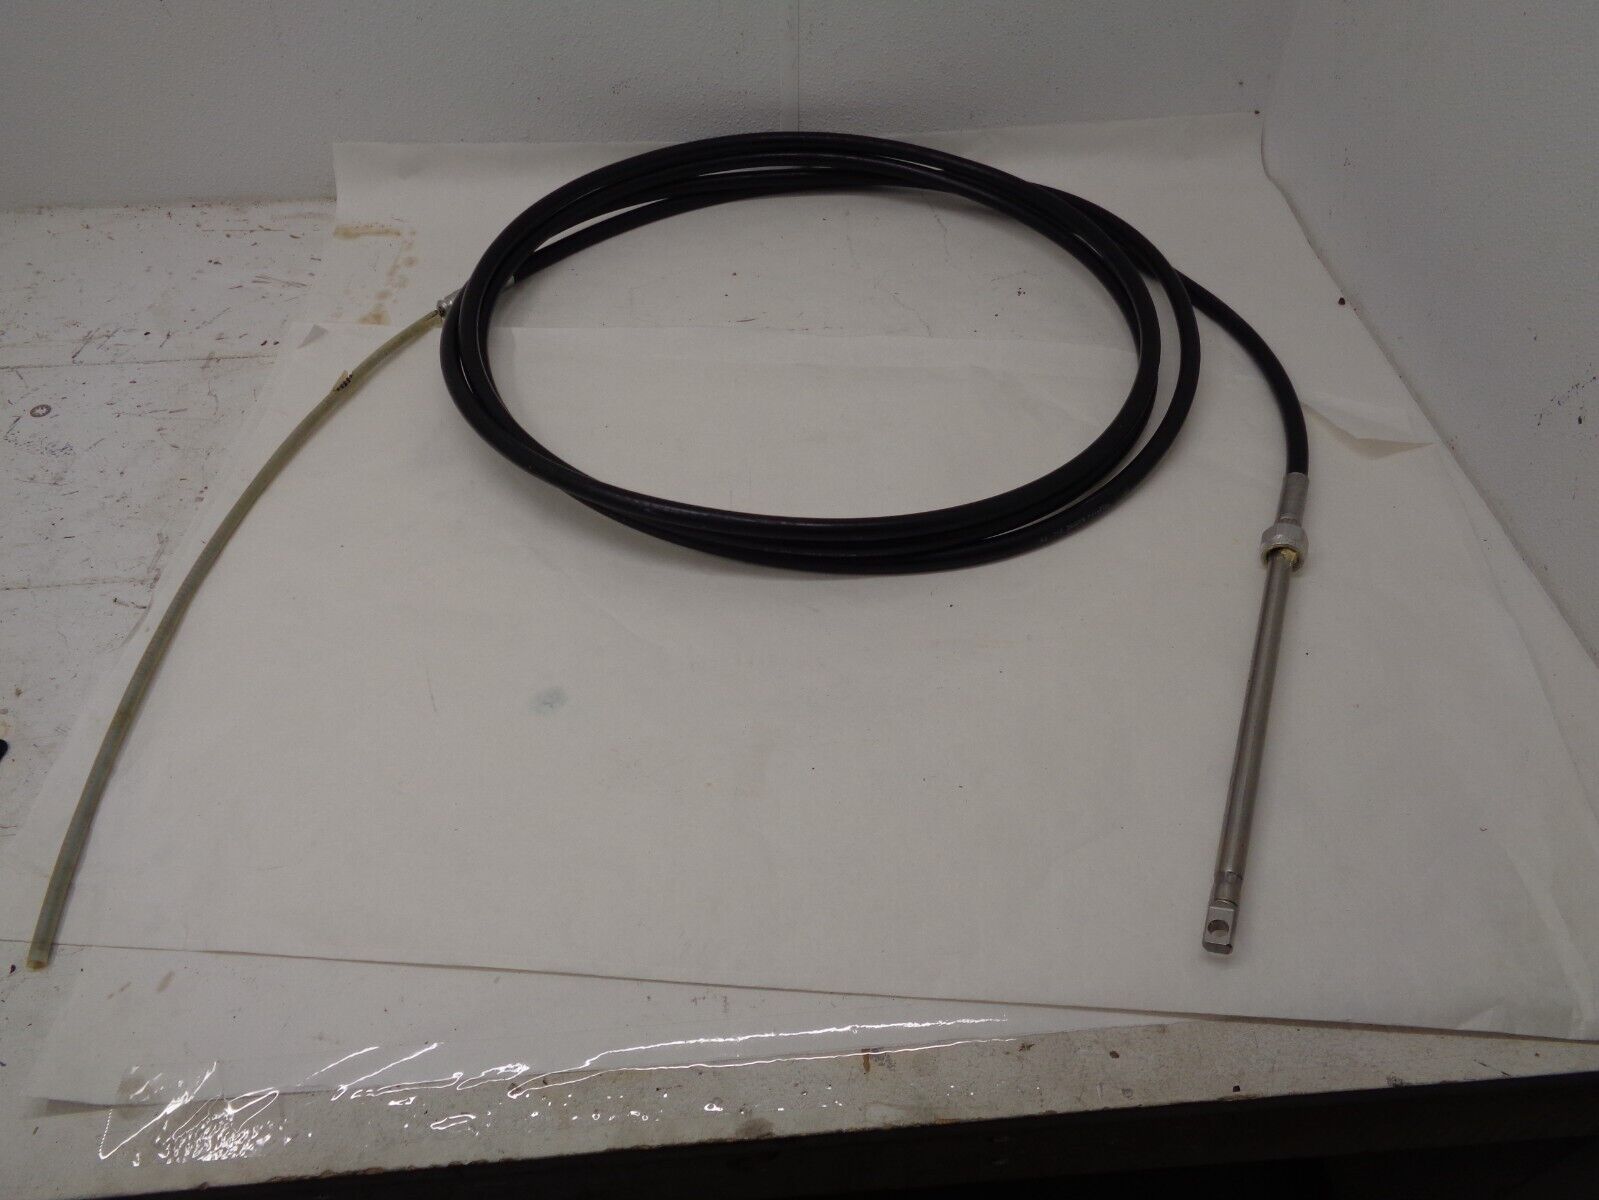 NEW TELEFLEX QUICK CONNECT ROTARY BOAT STEERING CABLE 22FT SSC6222 OUTBOARD